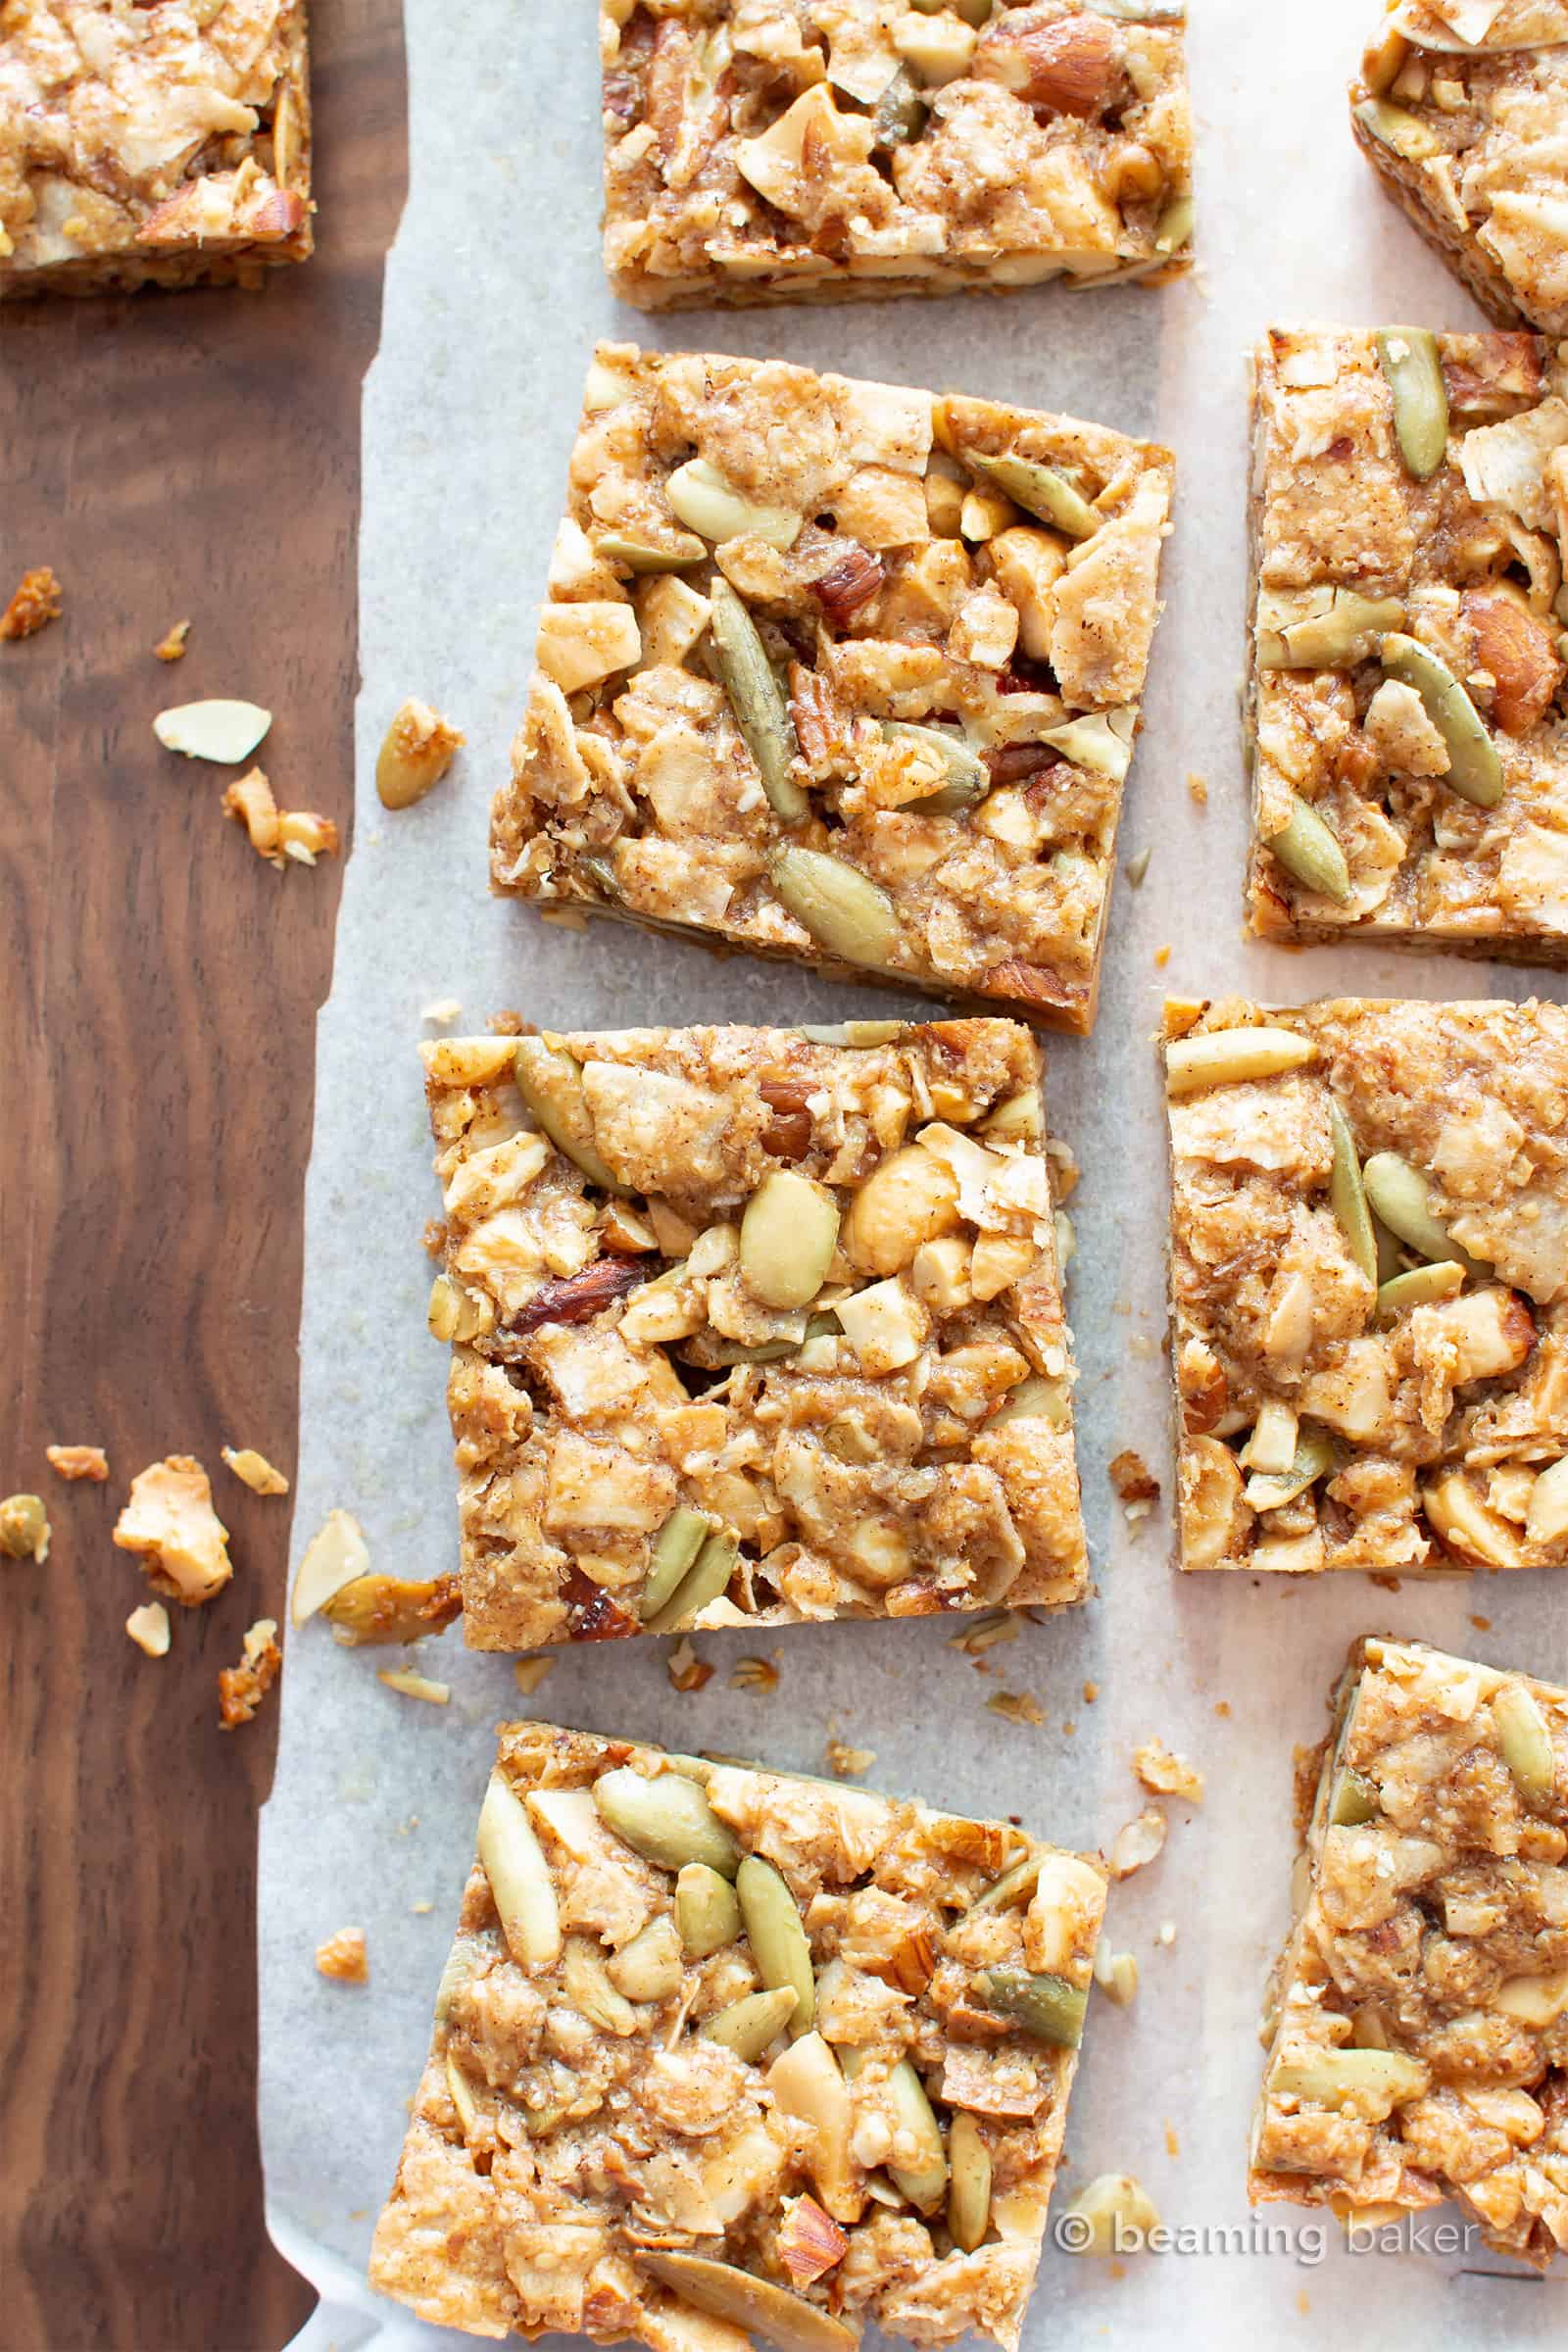 Paleo Snack Bars Recipe (GF, V): super EASY paleo approved snack bars, packed with nuts & seeds! The ultimate paleo diet snack bars—chewy, filling, gluten free, vegan & healthy! #Paleo #Snacks #GlutenFree #Vegan | Recipe at BeamingBaker.com